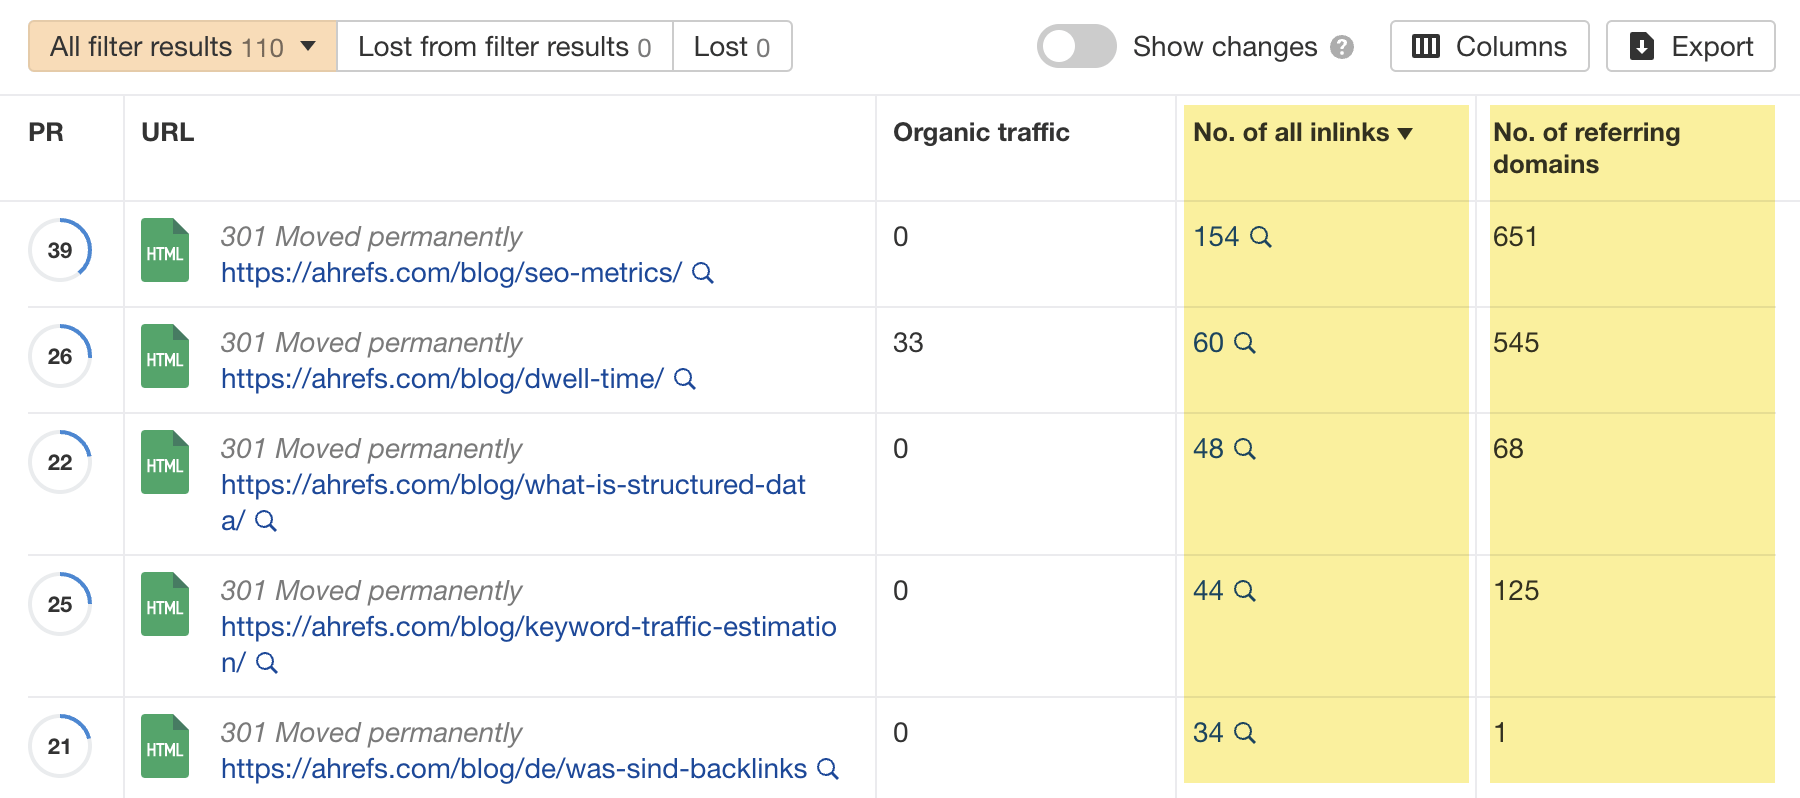 Redirects with internal links and backlinks, via Ahrefs' Site Audit
